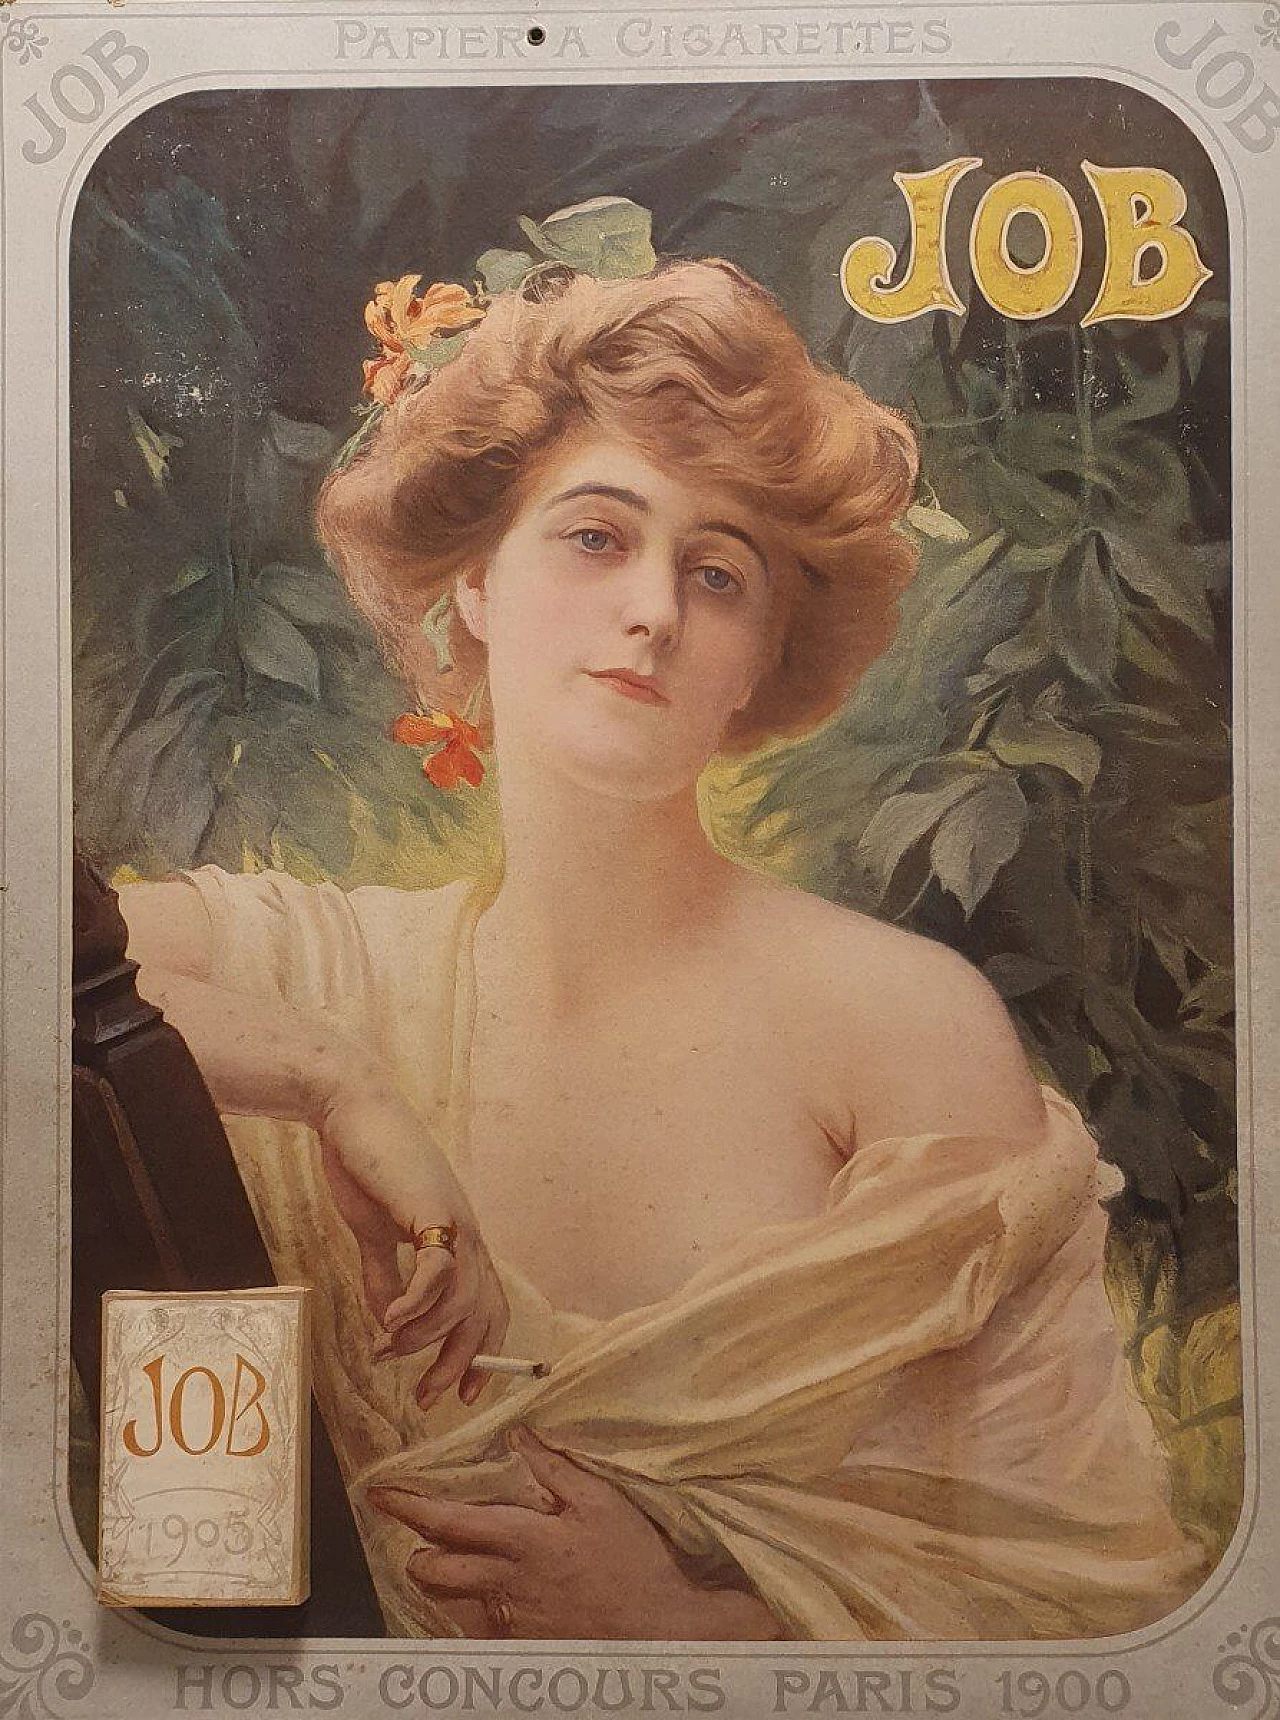 Advertising poster for the Job brand of cigarettes, 1905 5